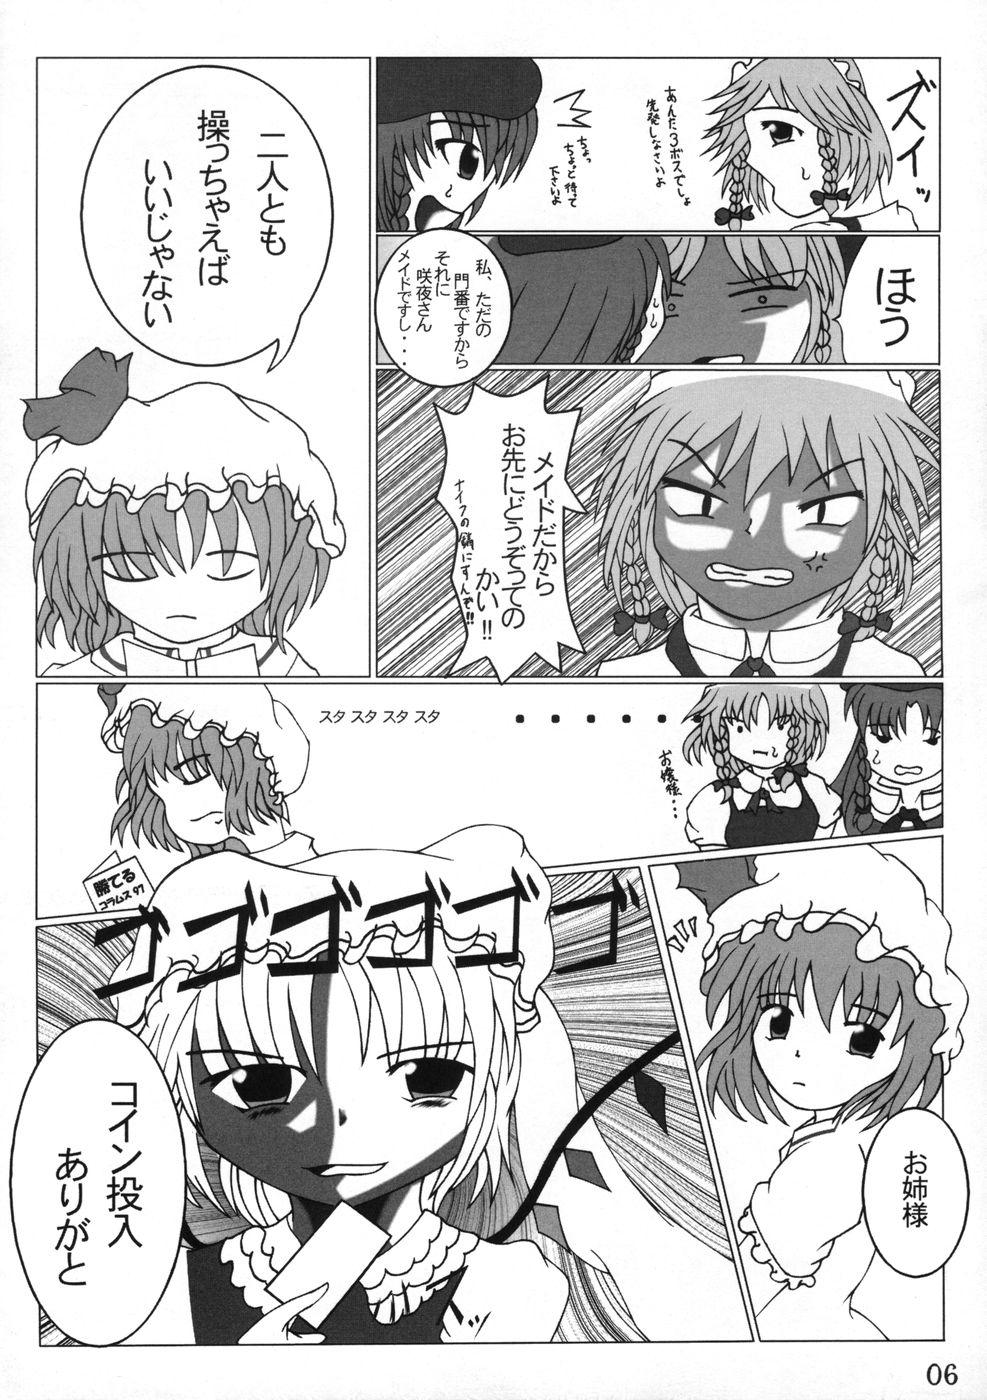 Blow Job 業創りし風 - Touhou project Point Of View - Page 6